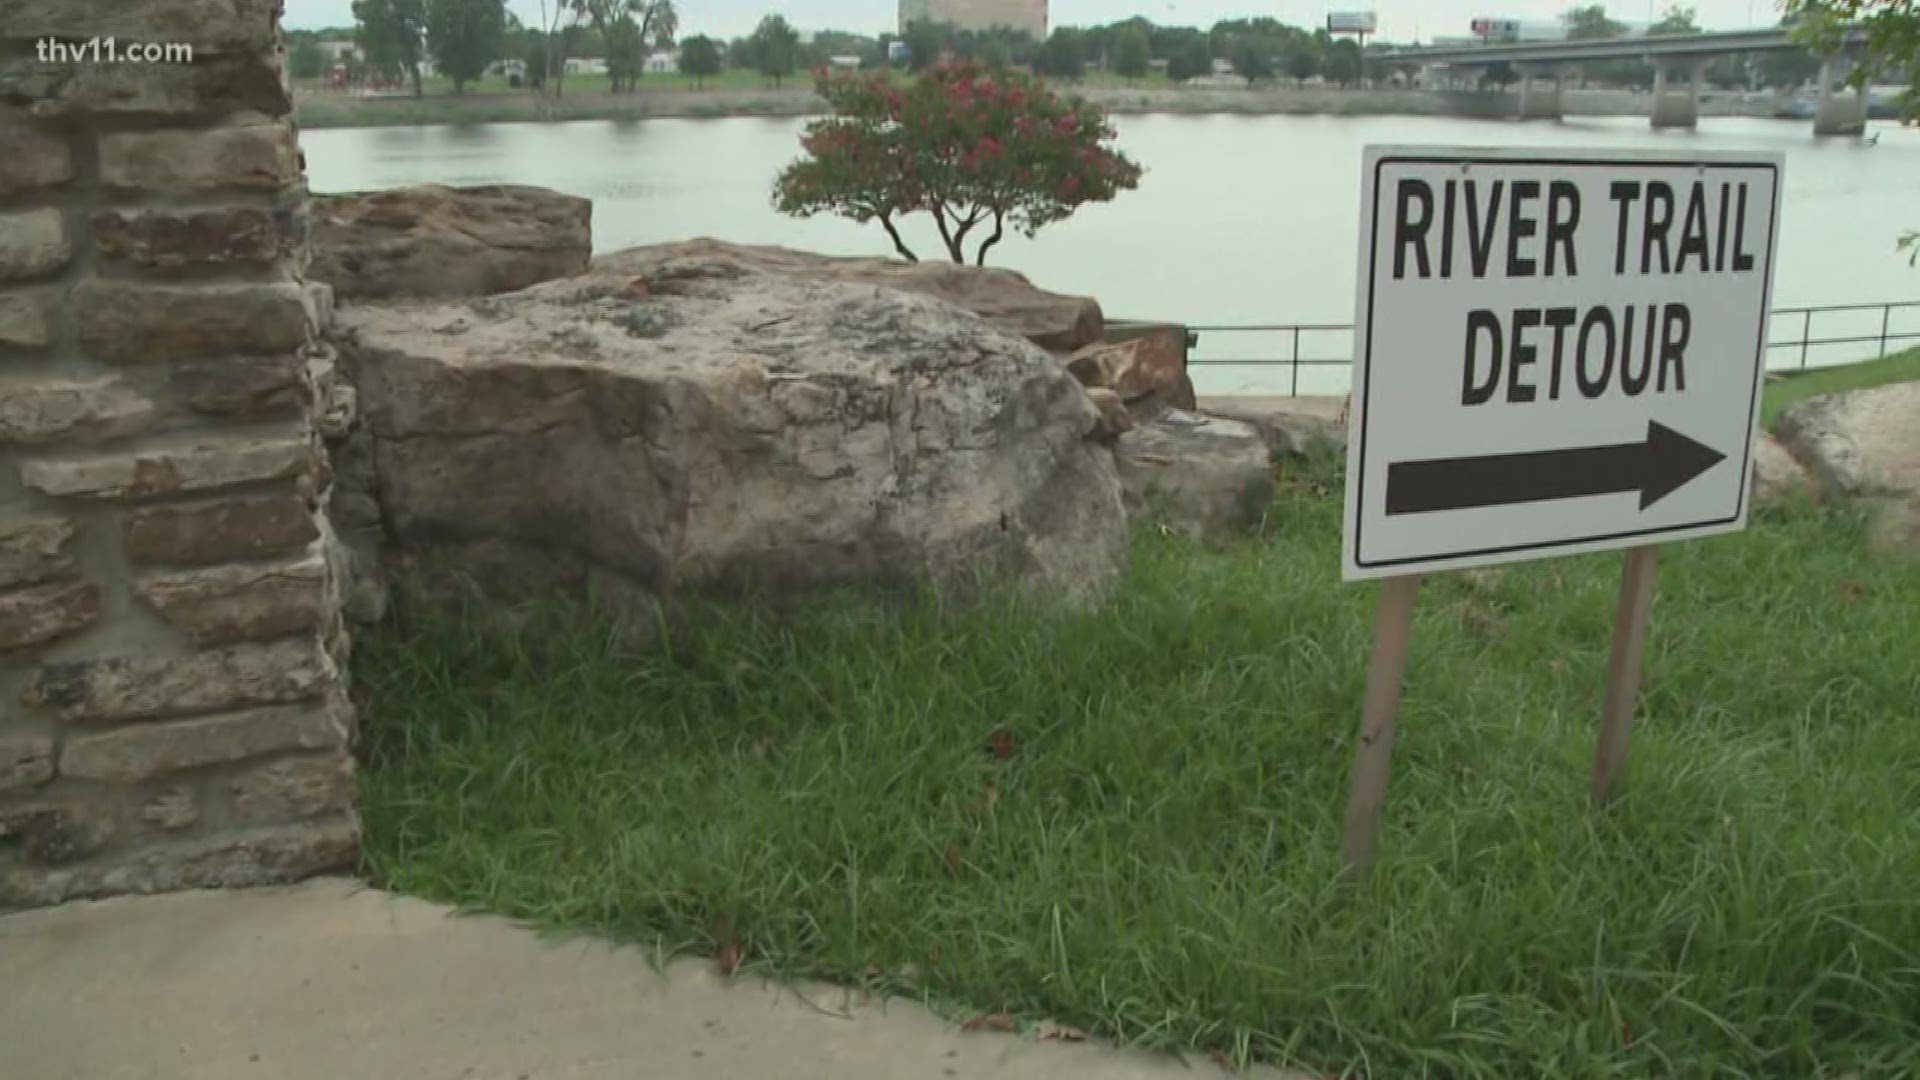 Changes are coming to the Arkansas River trail, which may cause a hiccup in your plans for the next few weeks, but will pay off in the long term.